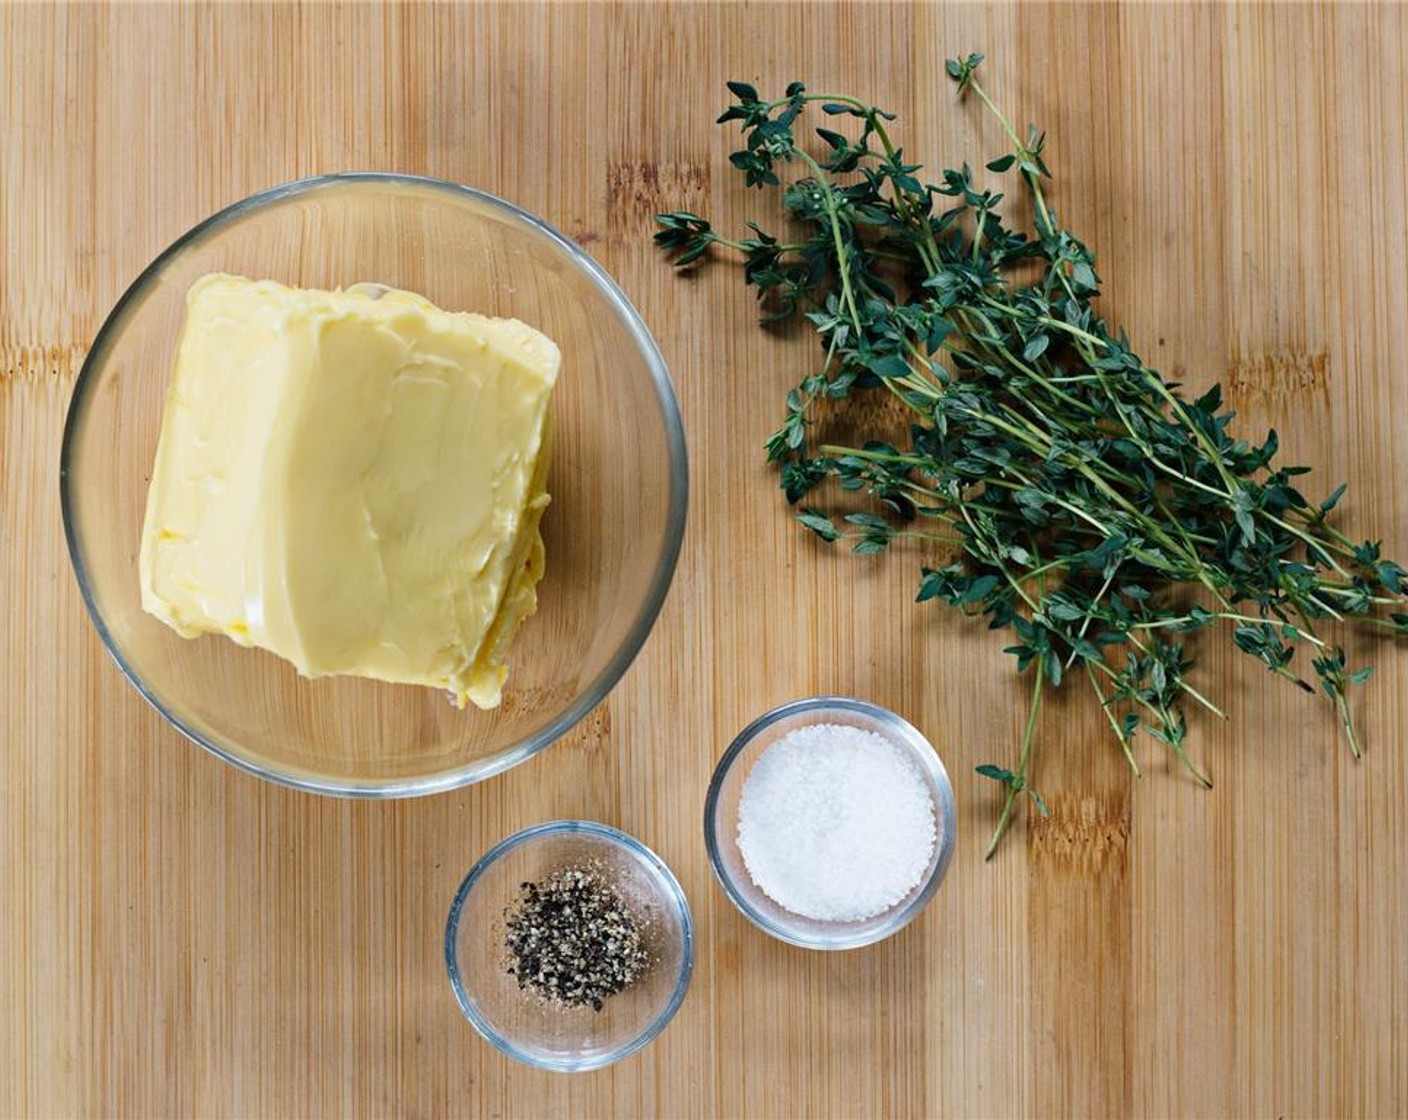 step 1 Remove Unsalted Butter (1/2 cup) and let come to room temperature, about an hour minutes.